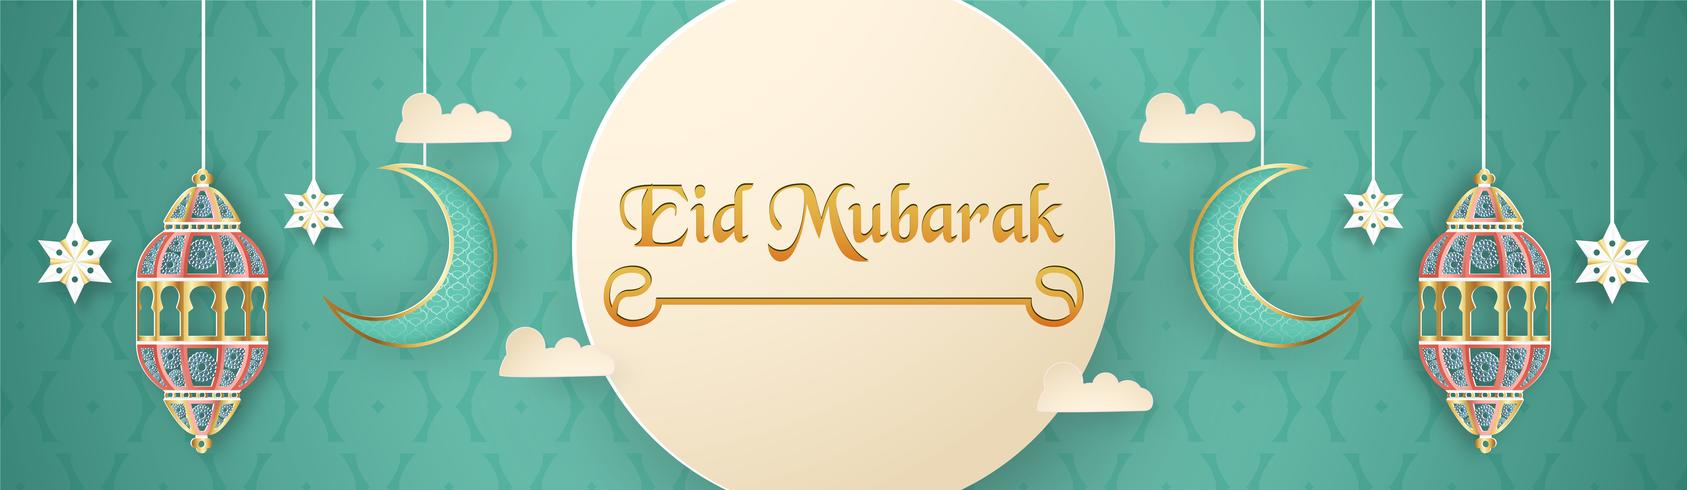 Template for Eid Mubarak with green and gold color tone. 3D Vector illustration in paper cut and craft  for islamic greeting card, invitation, book cover, brochure, web banner, advertisement.